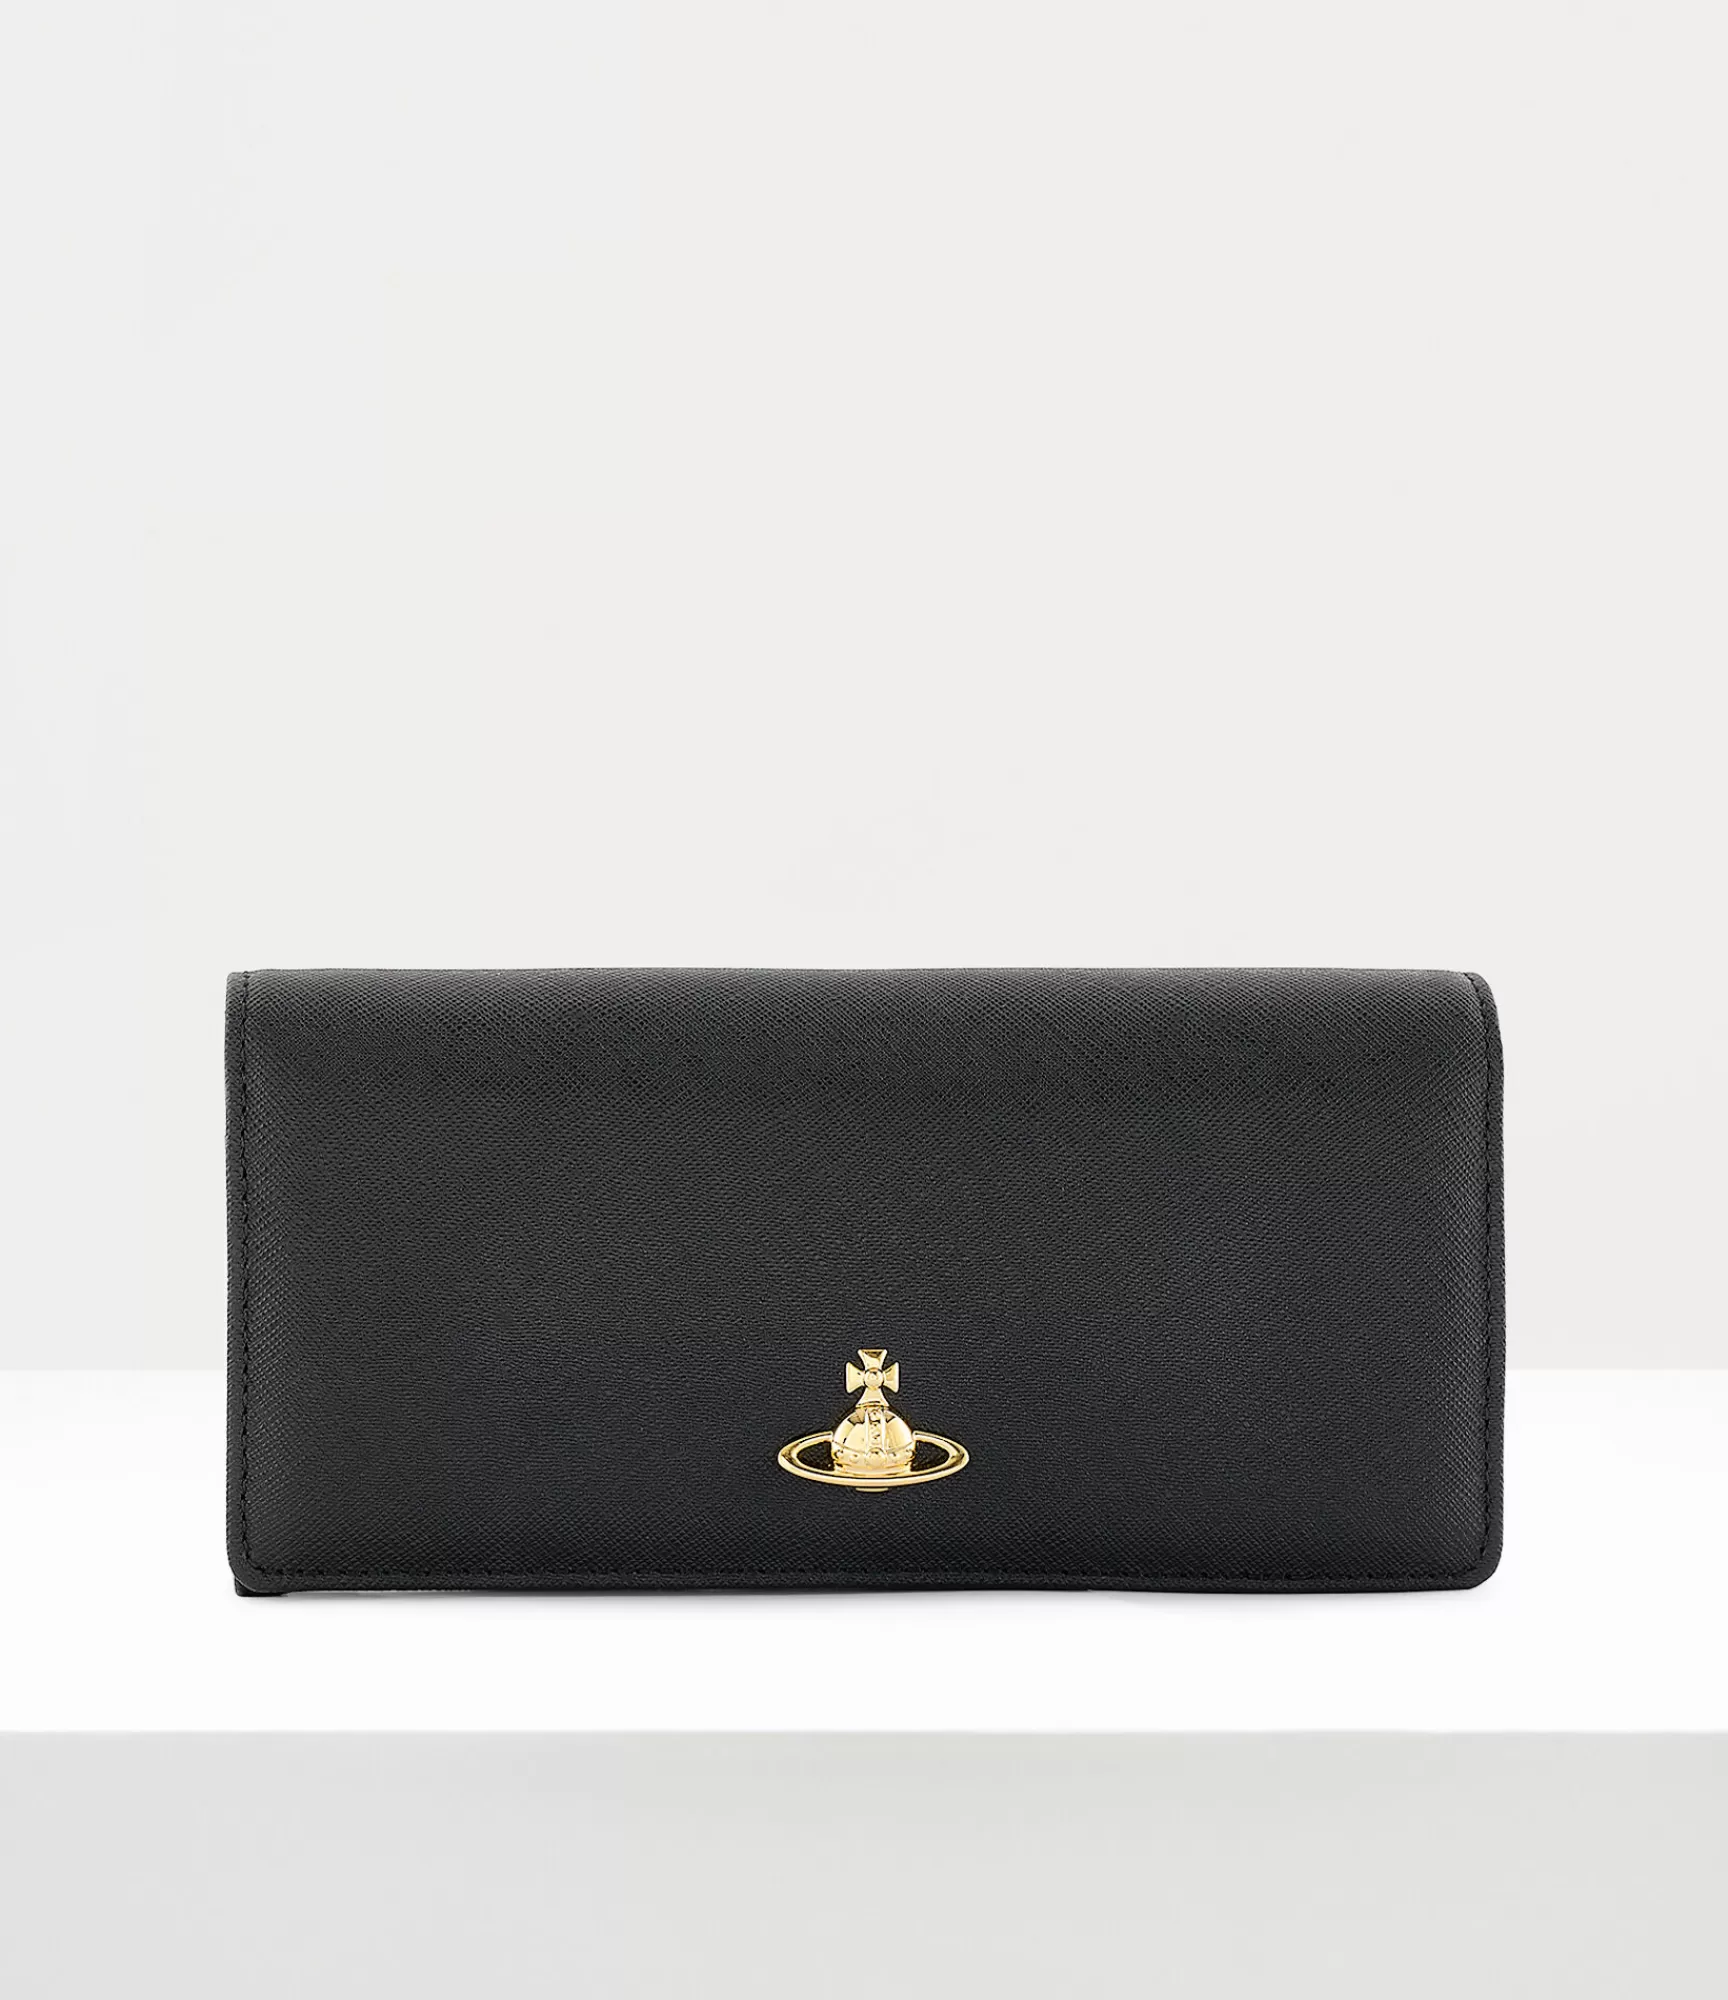 Vivienne Westwood Wallets and Purses*Classic credit card wallet Black